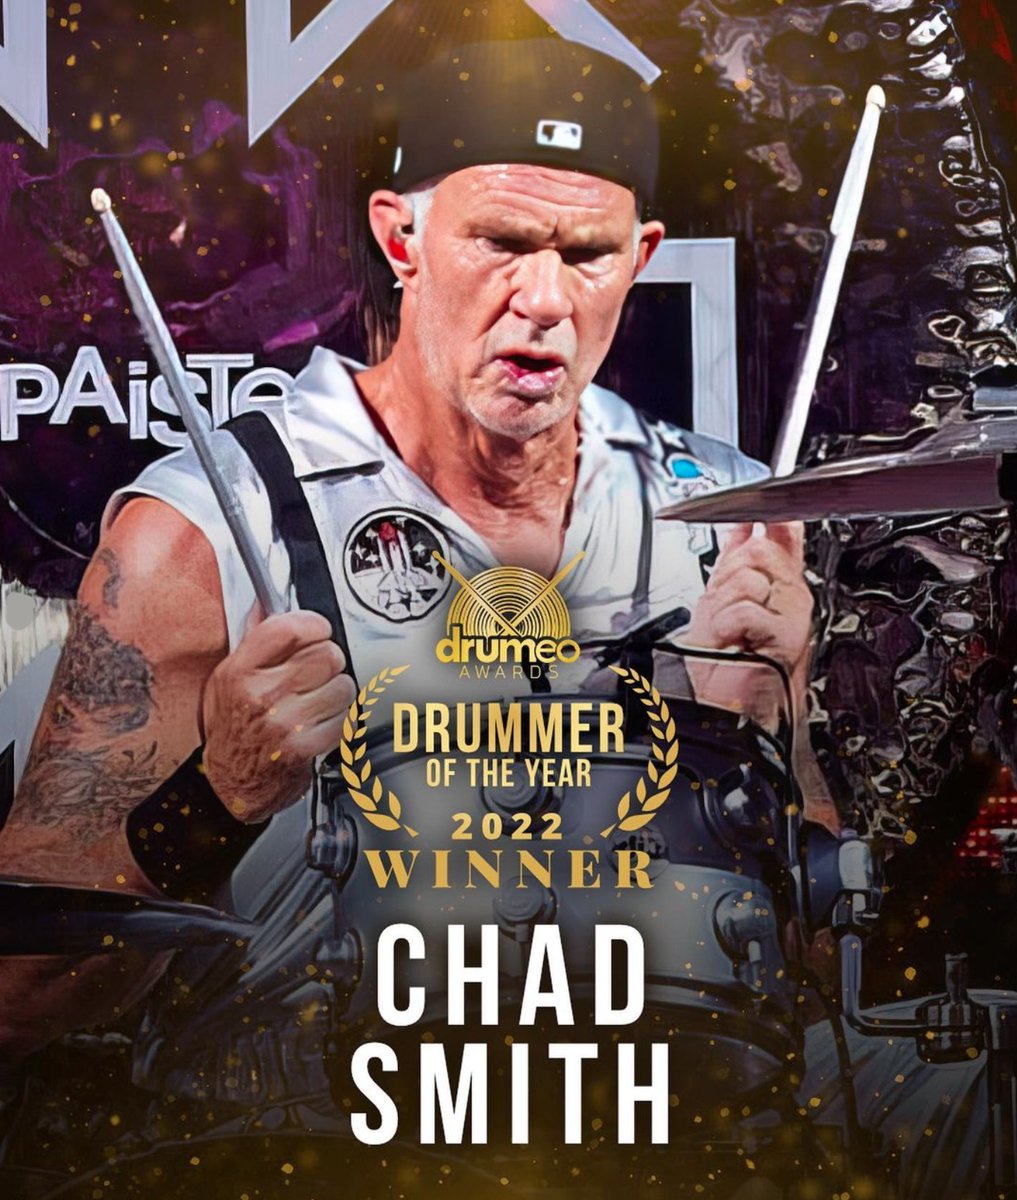 Congratulations to Chad Smith (Red Hot Chili Peppers) for winning this years Drumeo Award in the category “Drummer Of The Year”. It’s an honor having you be a part of the Paiste Artist Family.

@ChiliPeppers @drumeo #chadsmith #rhcp #redhotchilipeppers #drumeoawards #chilipeppers